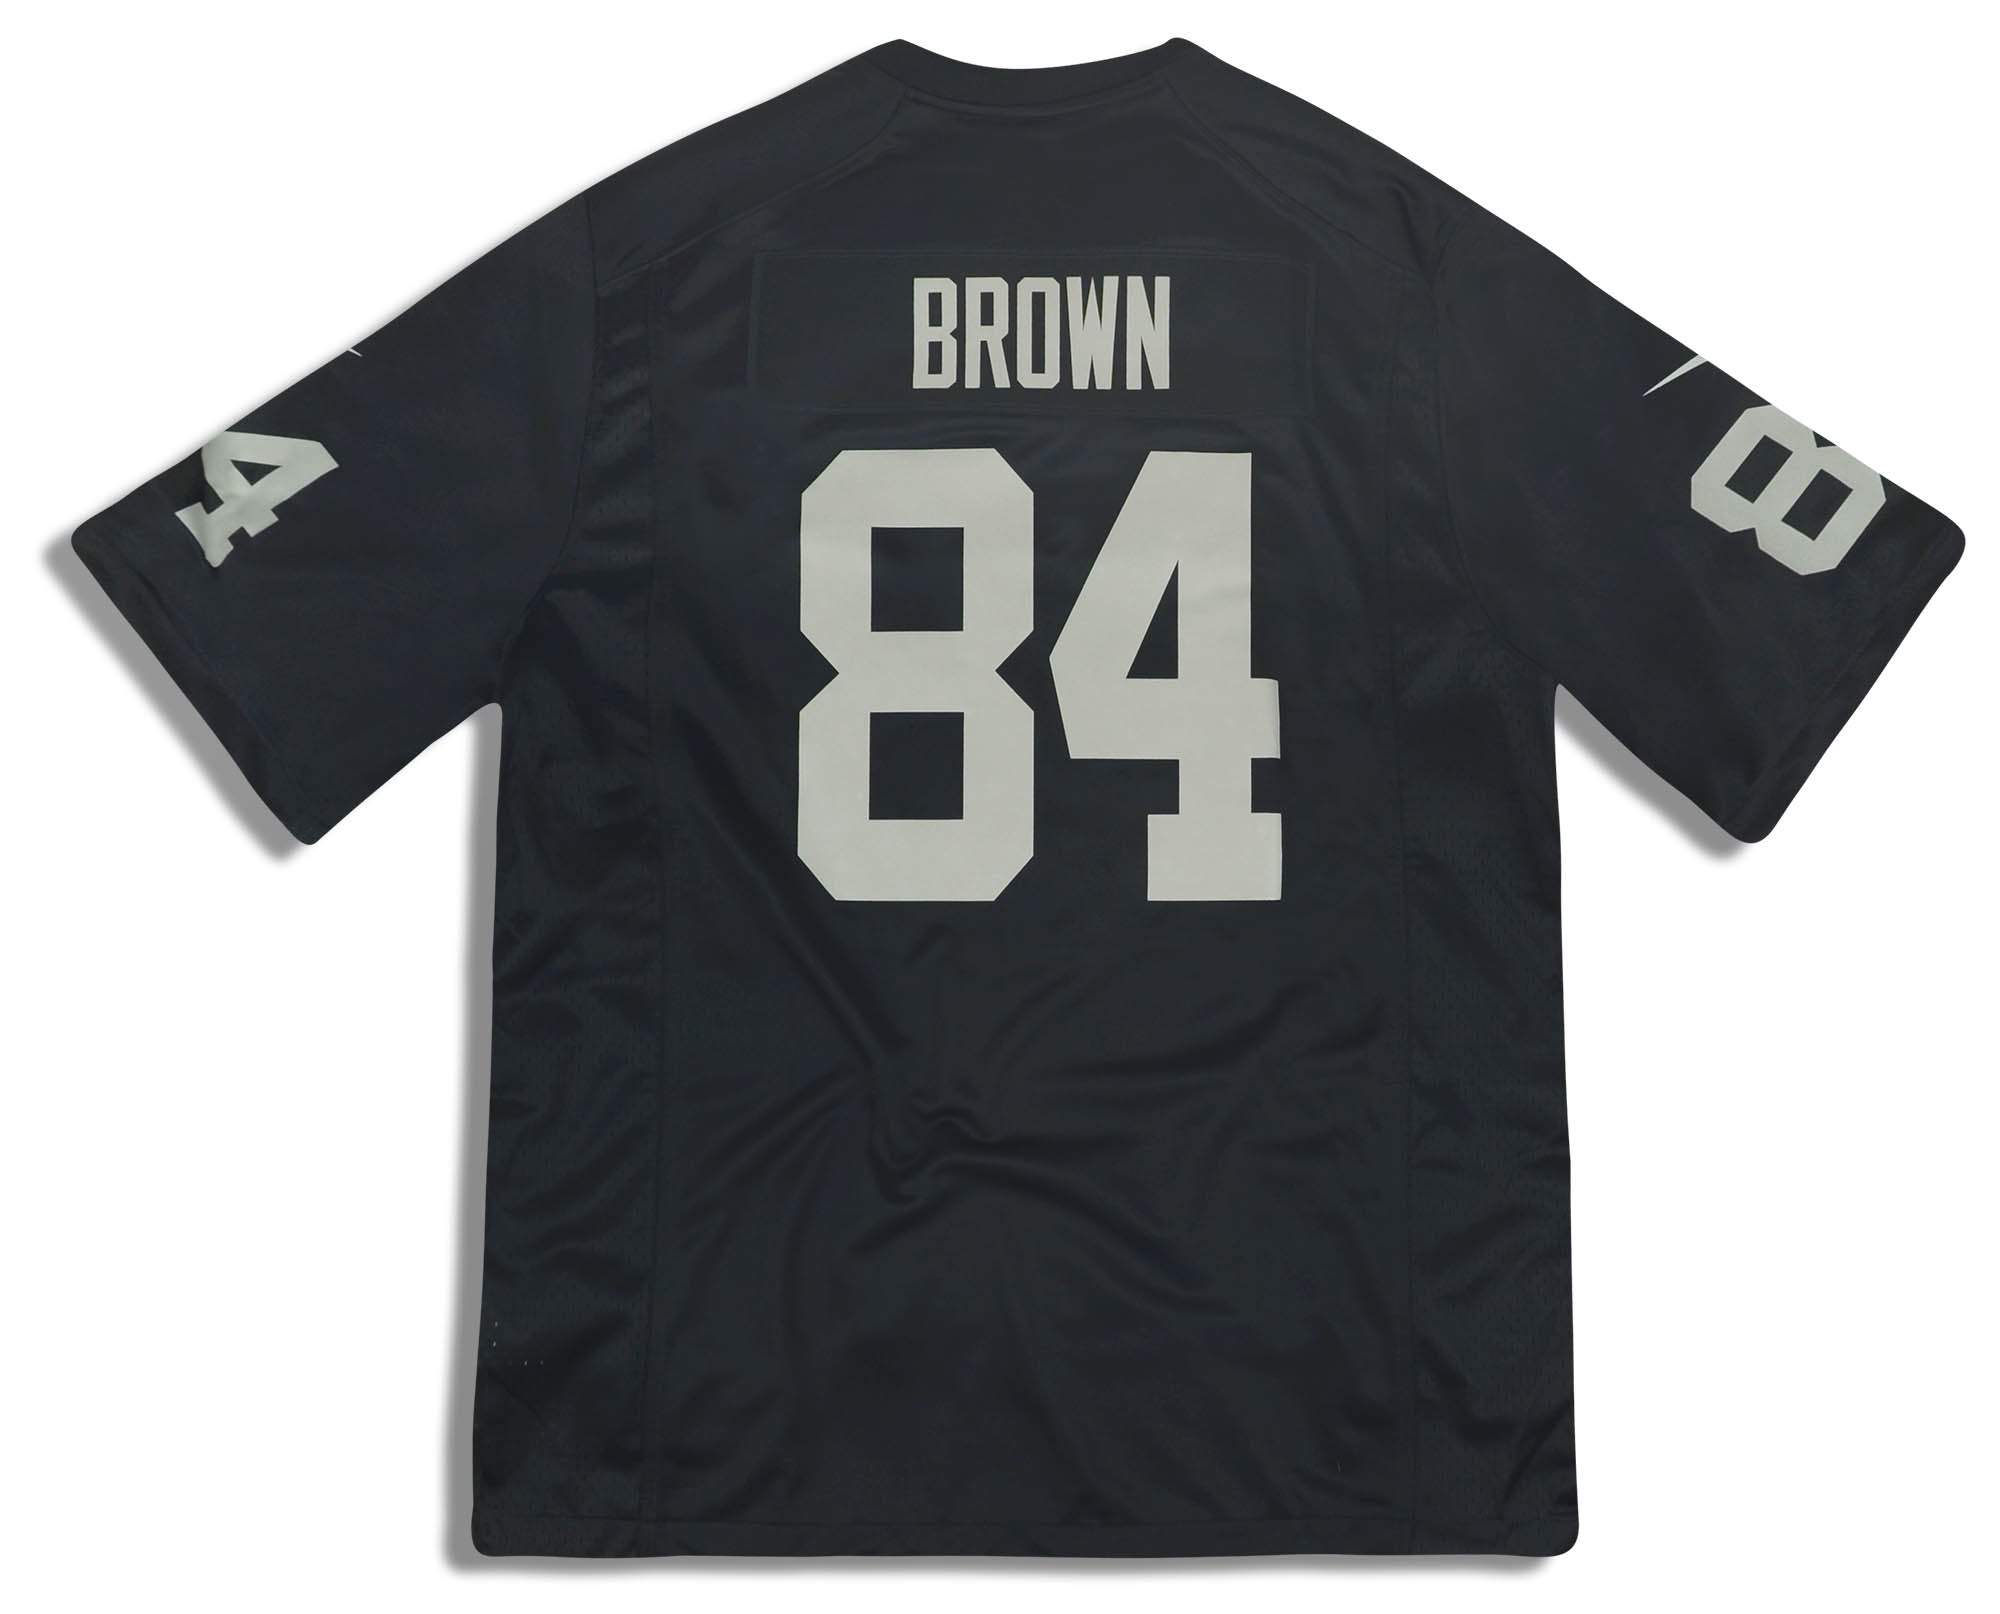 2019 OAKLAND RAIDERS BROWN #84 NIKE GAME JERSEY (HOME) XL - W/TAGS -  Classic American Sports